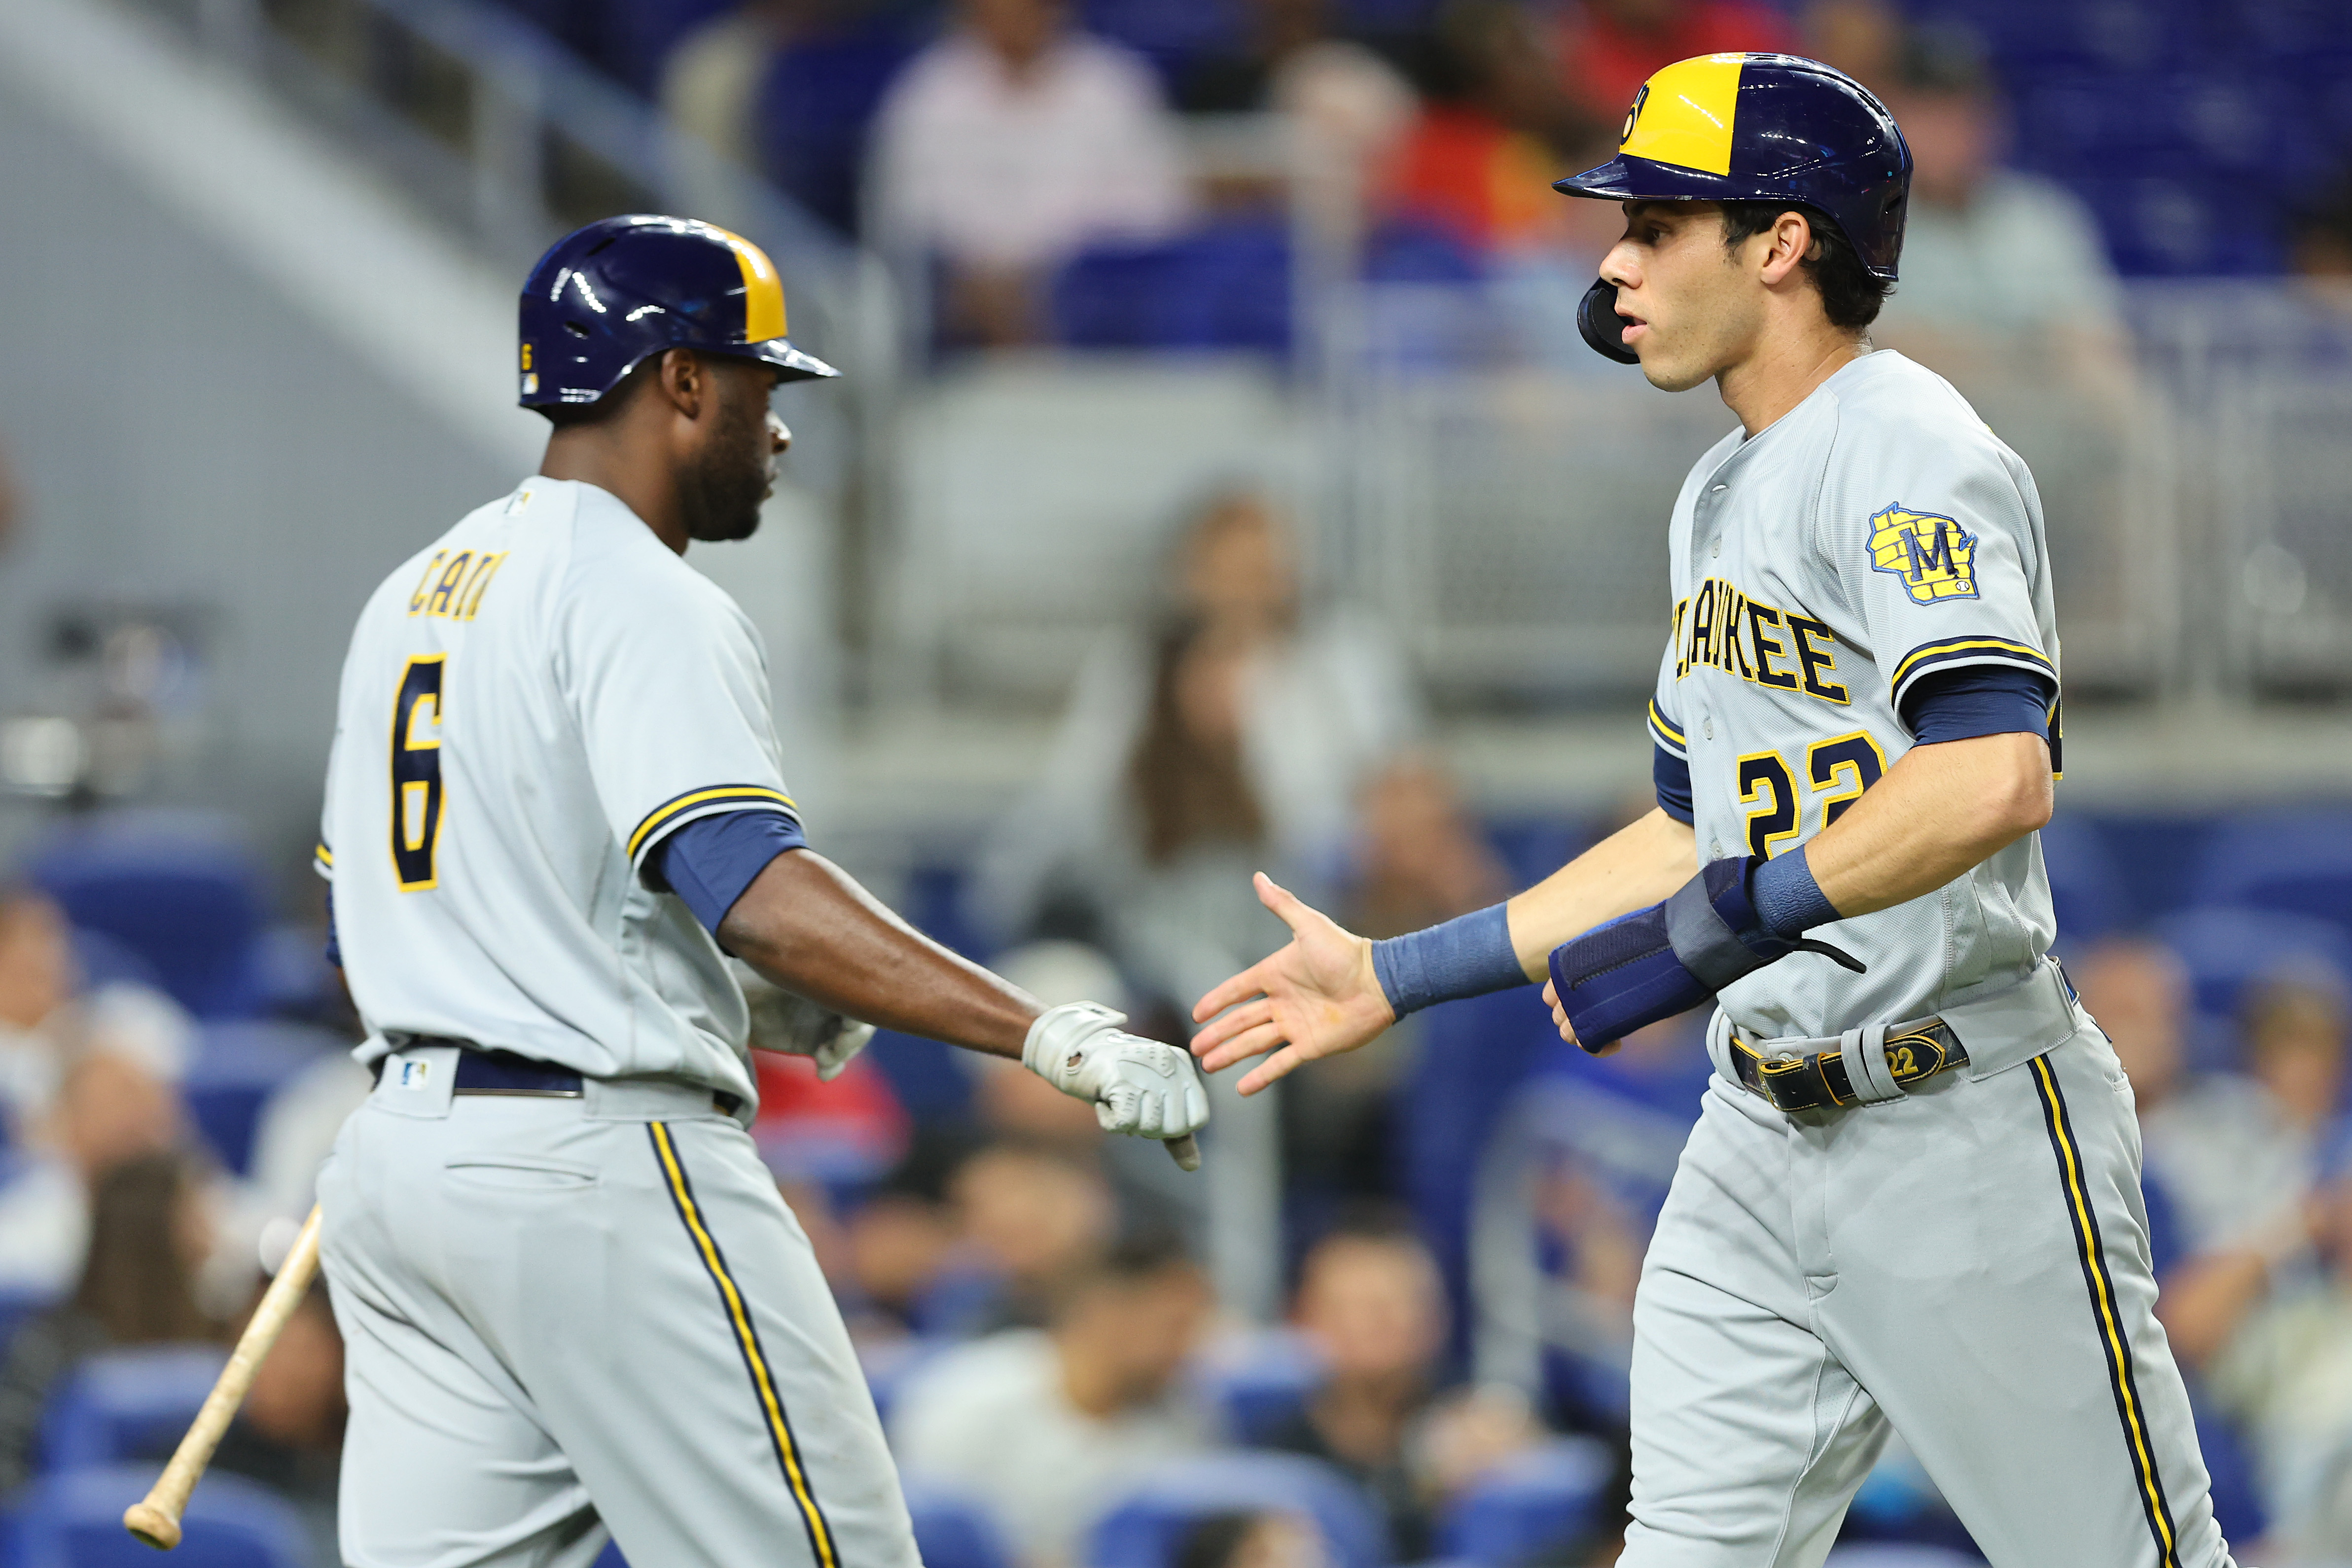 Lorenzo Cain saves the Brewers with homer-robbing, game-ending catch